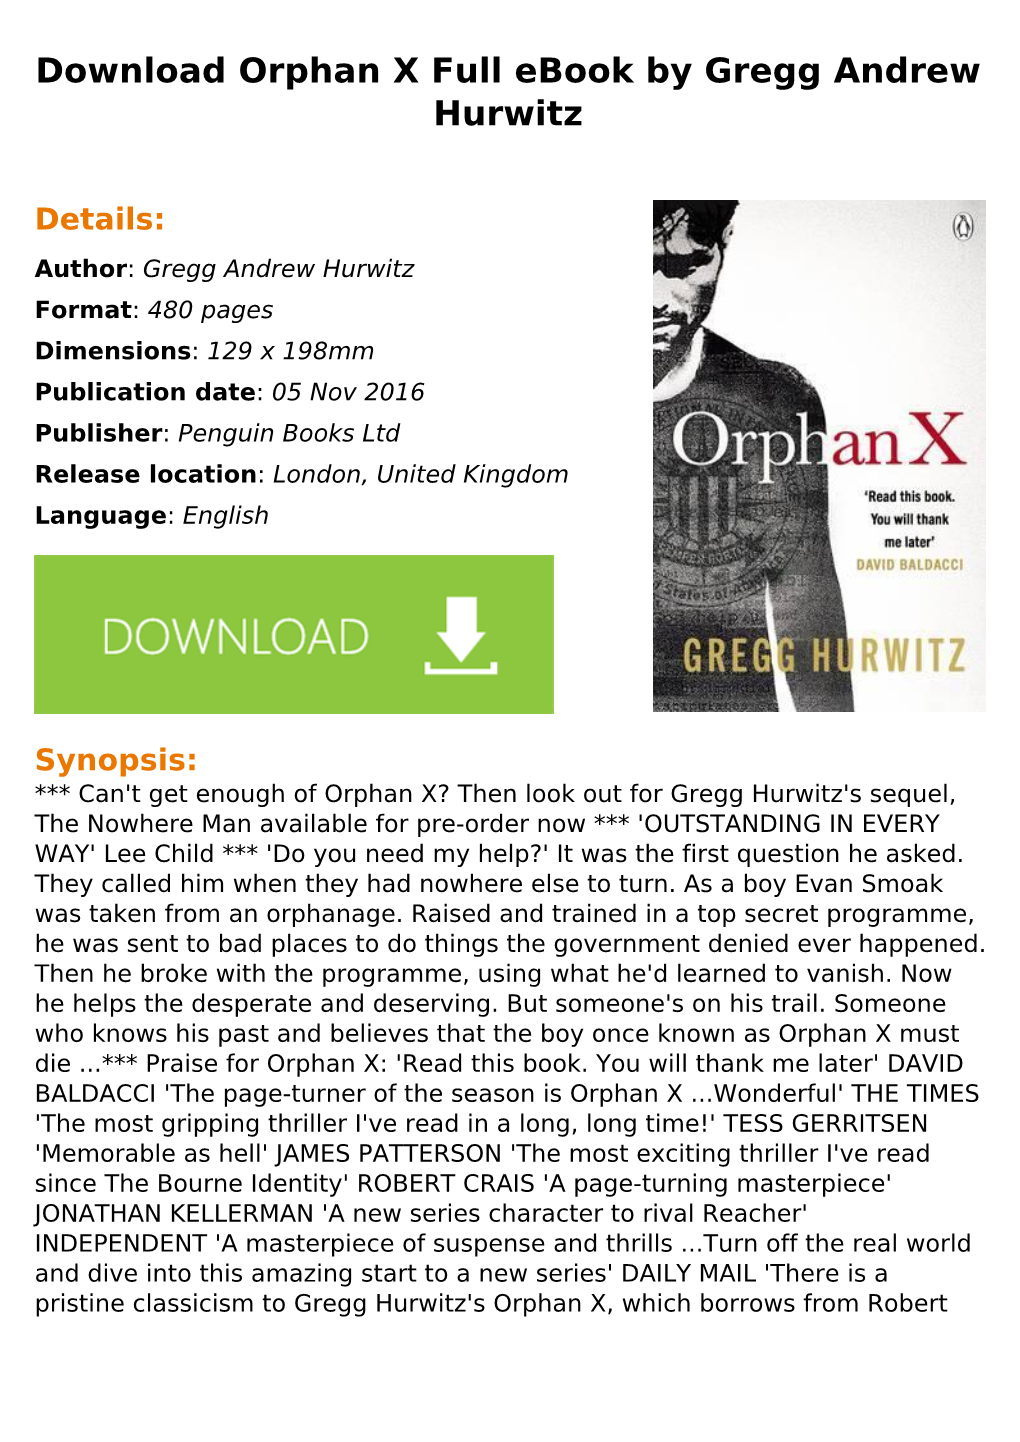 Download Orphan X Full Ebook by Gregg Andrew Hurwitz